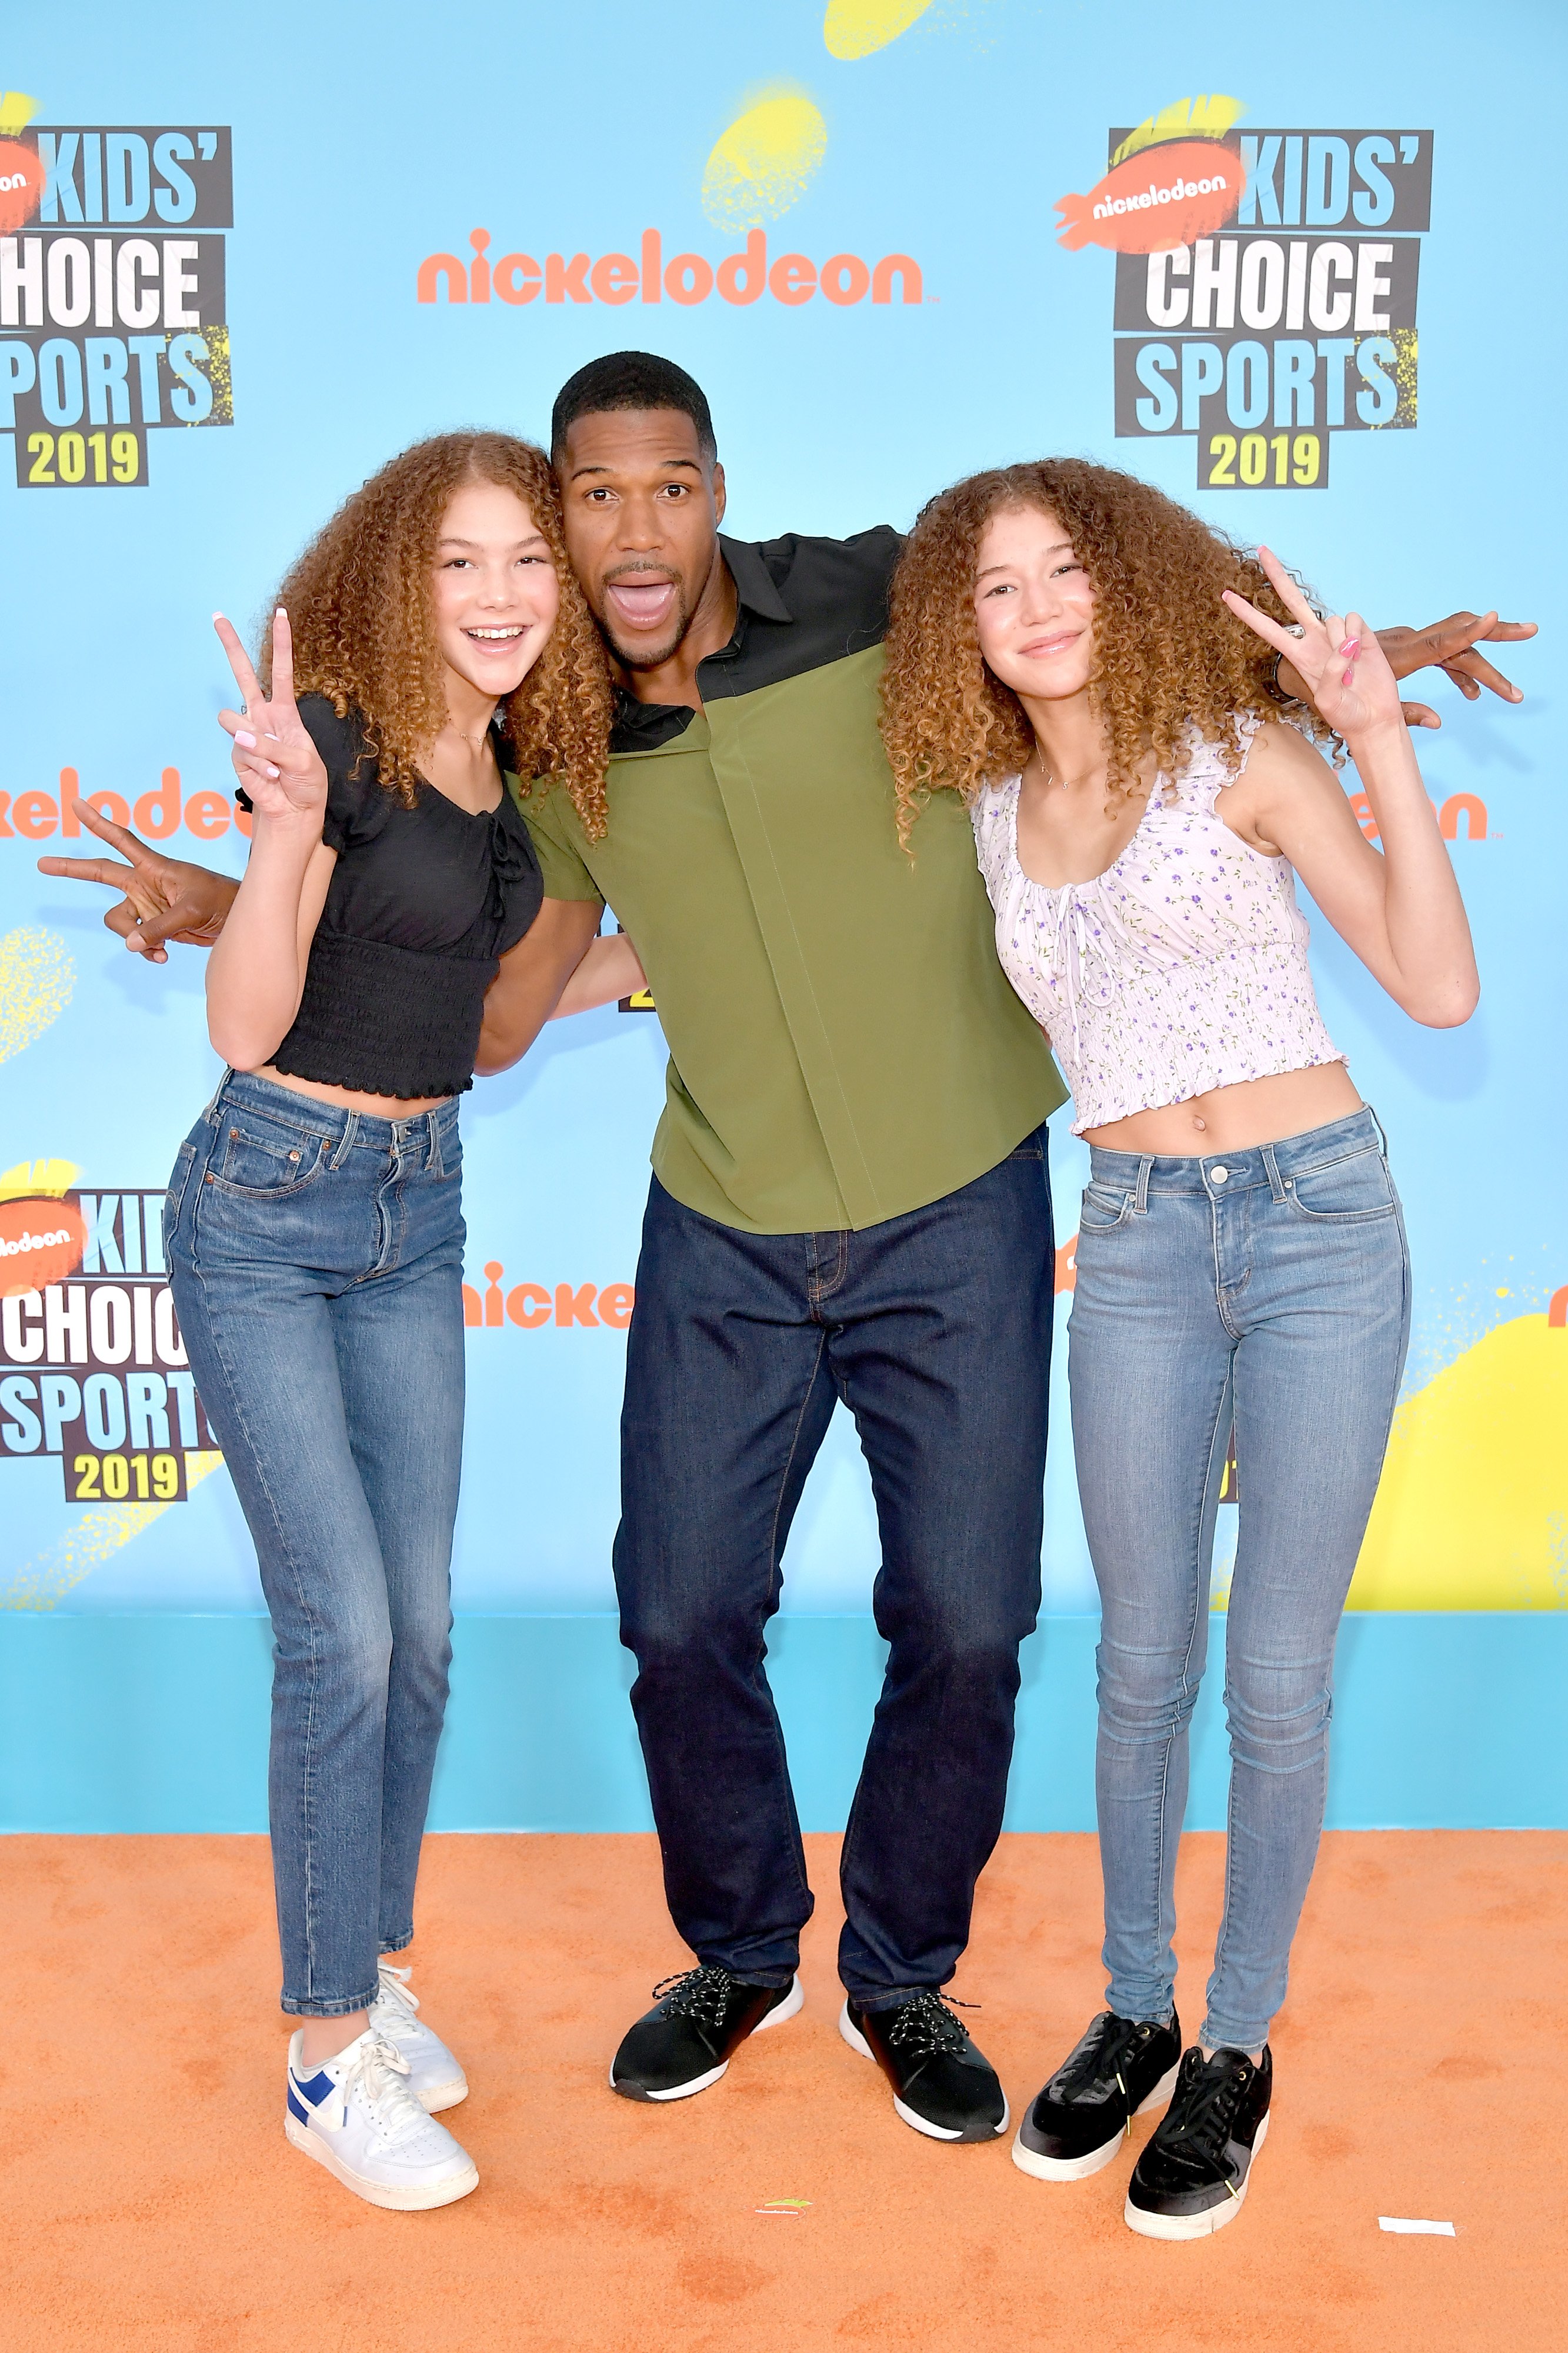  Isabella Strahan, host Michael Strahan, and Sophia Strahan attend Nickelodeon Kids' Choice Sports 2019 on July 11, 2019 | Photo: GettyImages